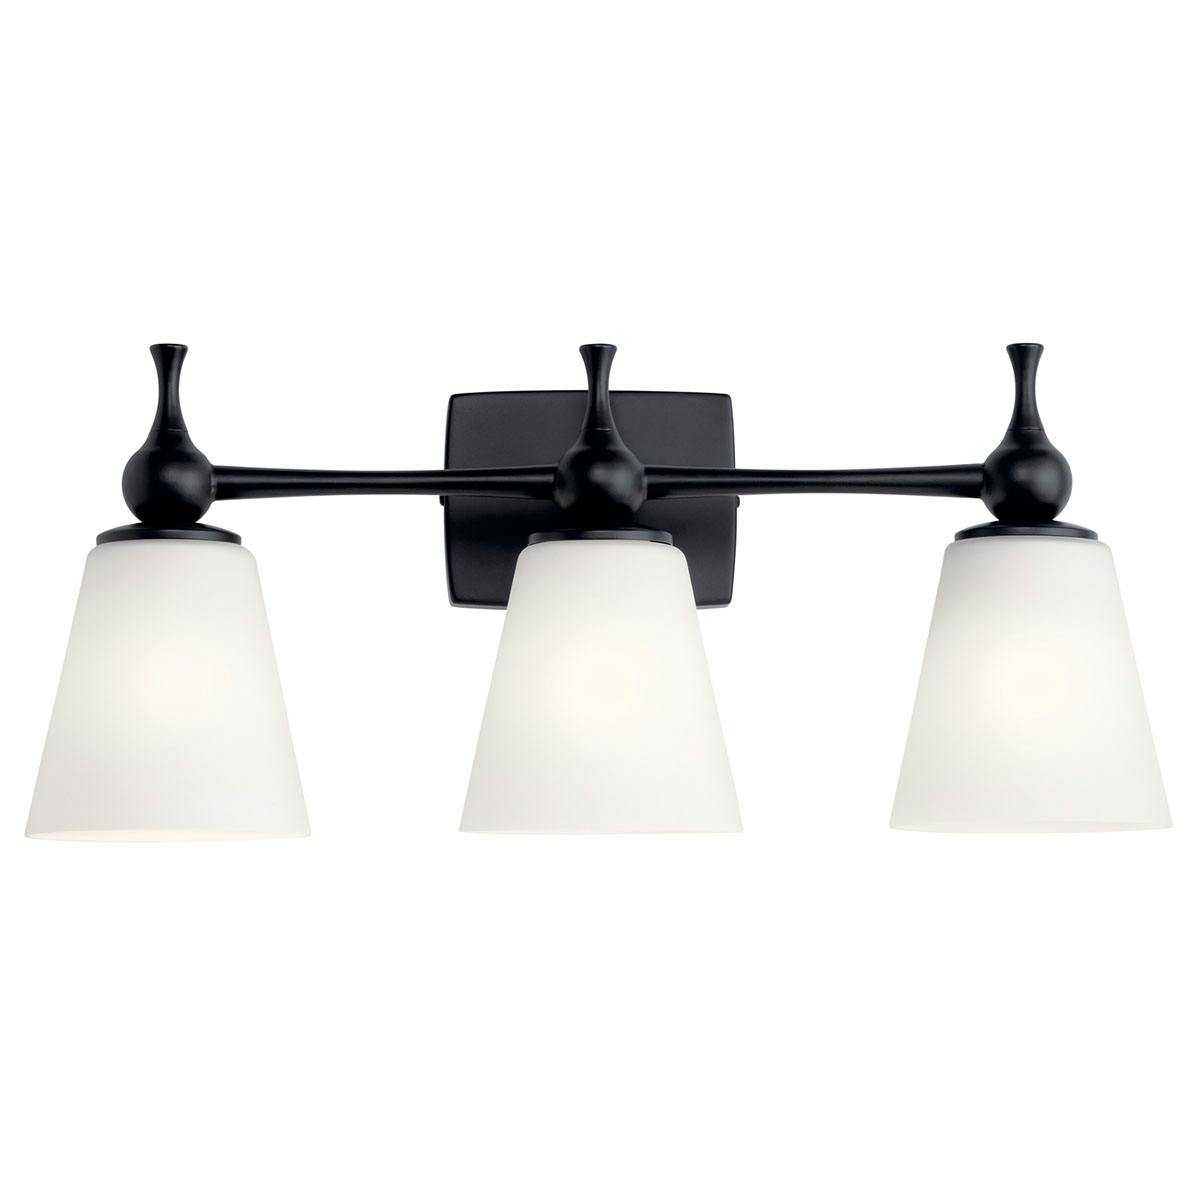 Front view of the Cosabella 24" Vanity Light Black on a white background